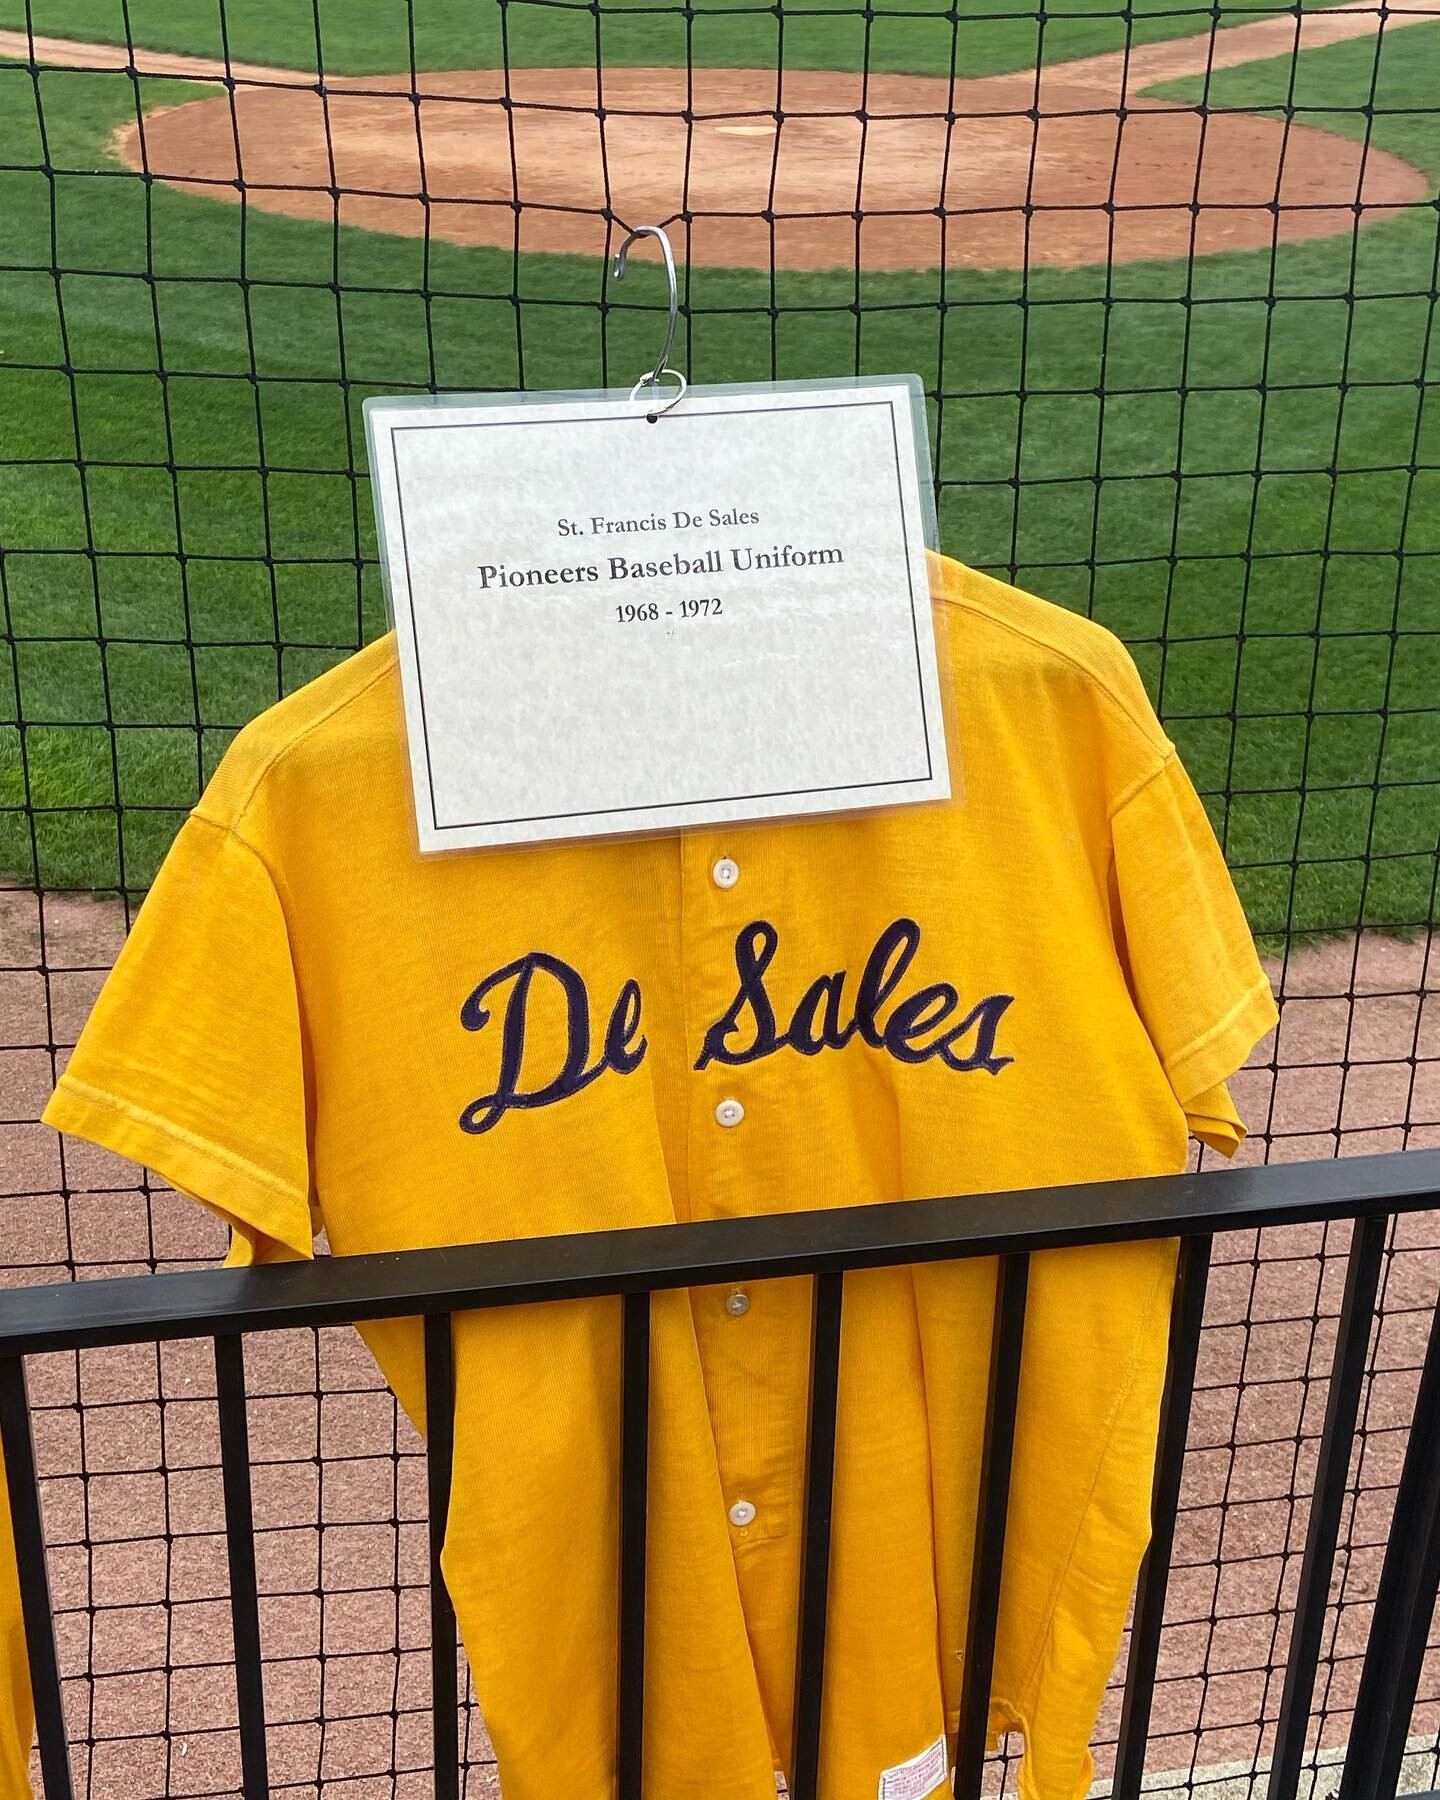 We are excited to welcome all alums and friends of SFDS to the Al Lodl Tribute Baseball Game at Oil City Stadium! All proceeds go to St. Francis de Sales High School in memory of Al Lodl. It&rsquo;s a great day to be a Pioneer! #allodltributegame